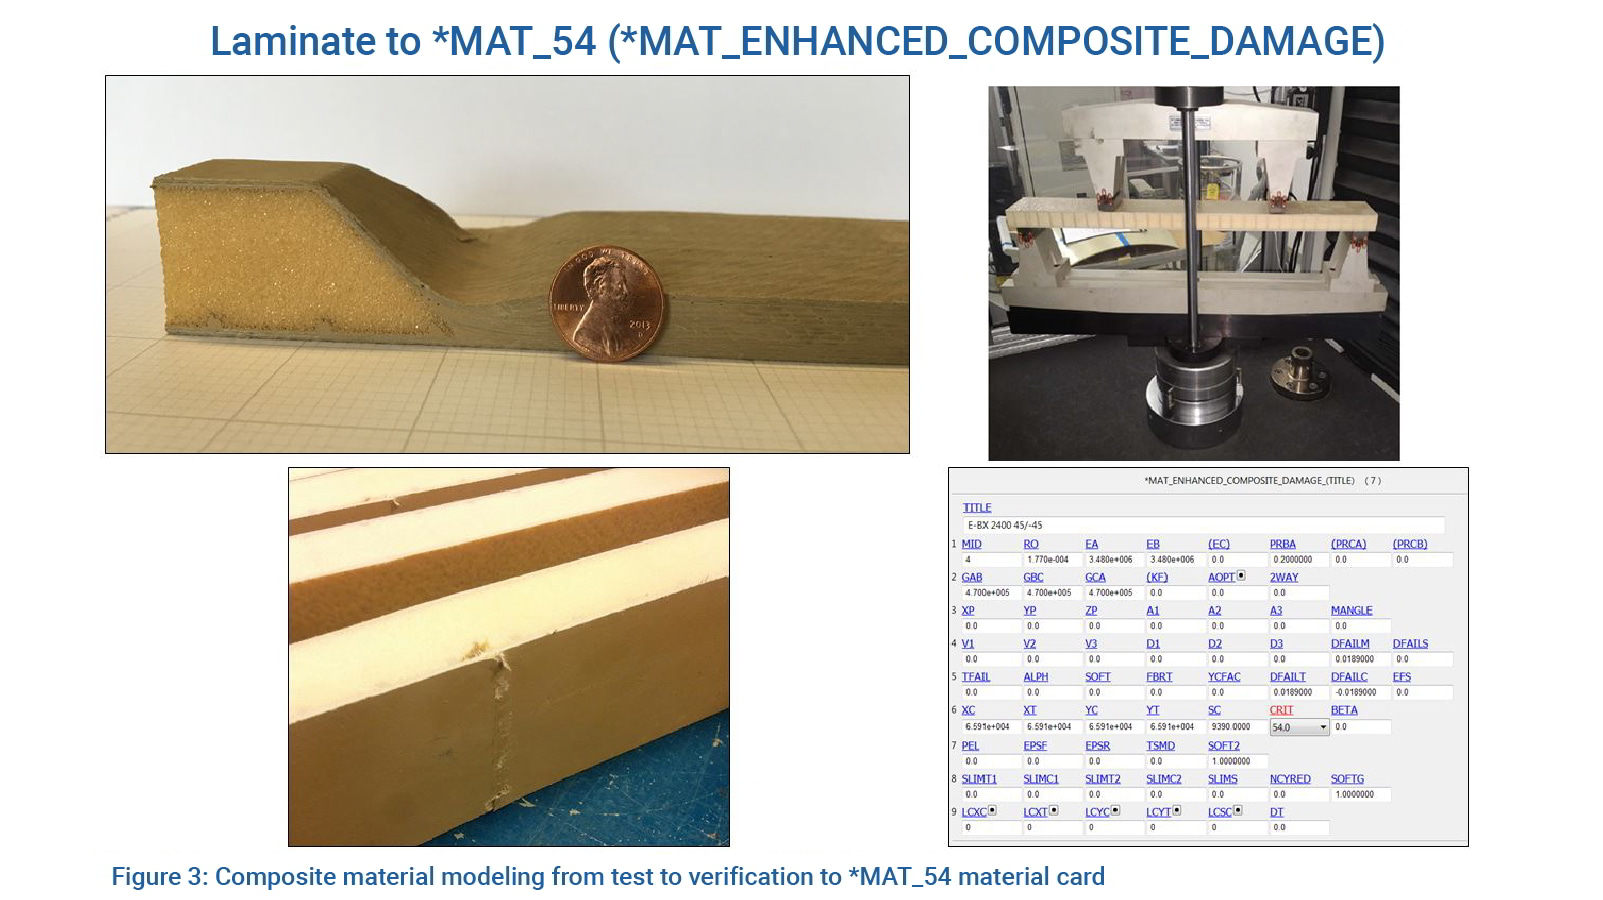 Figure 3: Composite material modeling from test to verification to *MAT_54 material card